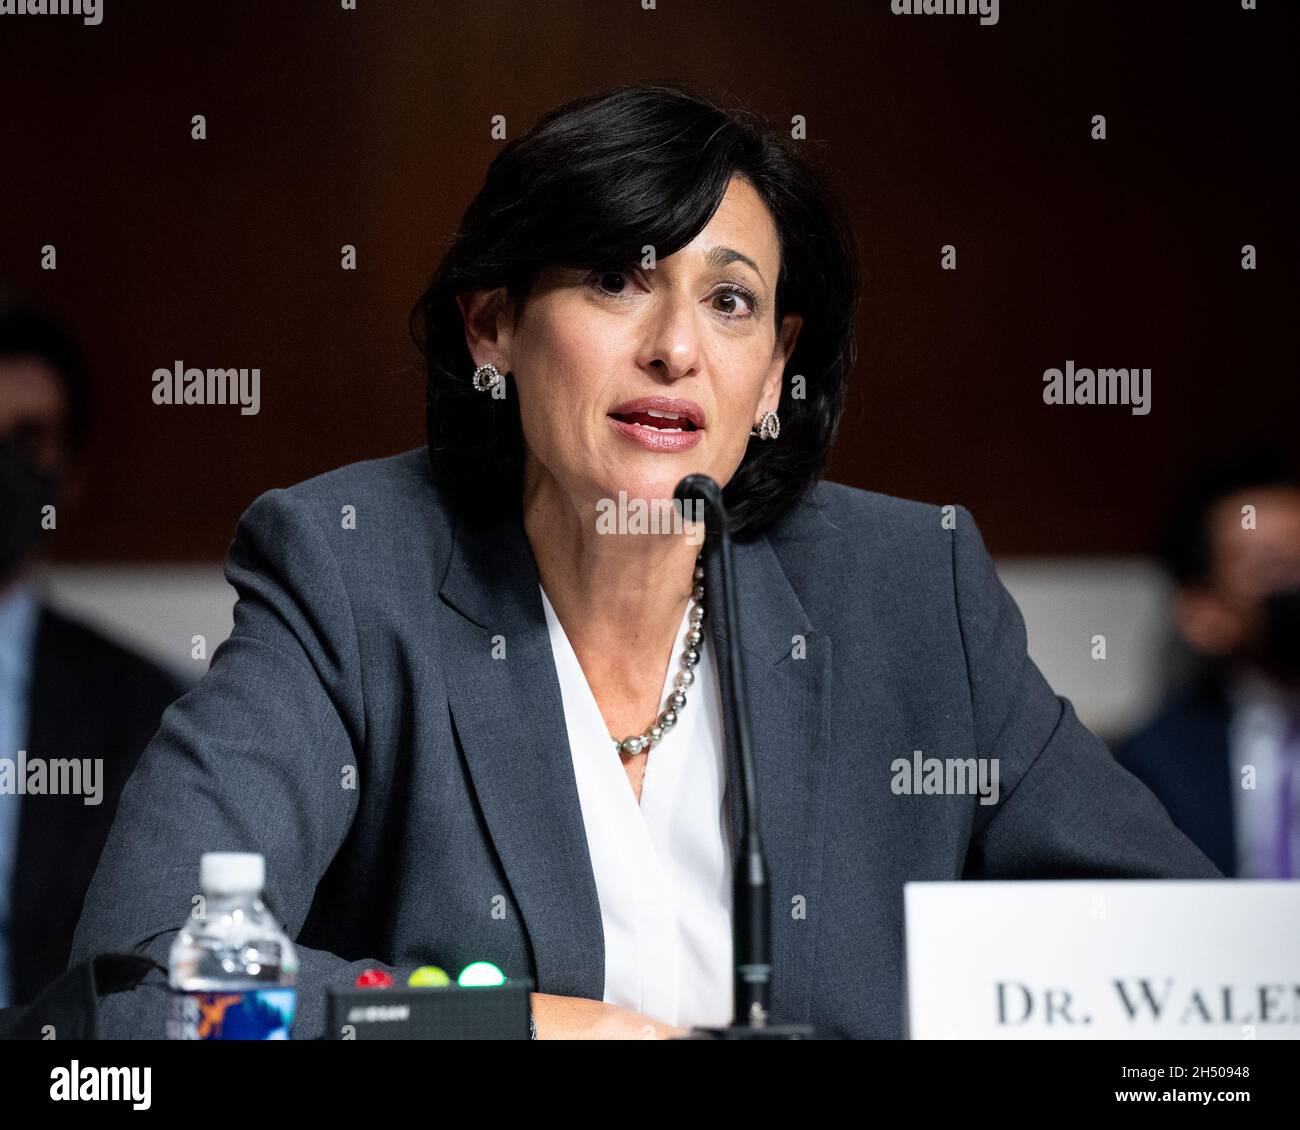 Dr. Rochelle Walensky, Director of the Centers for Disease Control and Prevention, speaking at a hearing of the Senate Health, Education, Labor, and Pensions Committee. Stock Photo